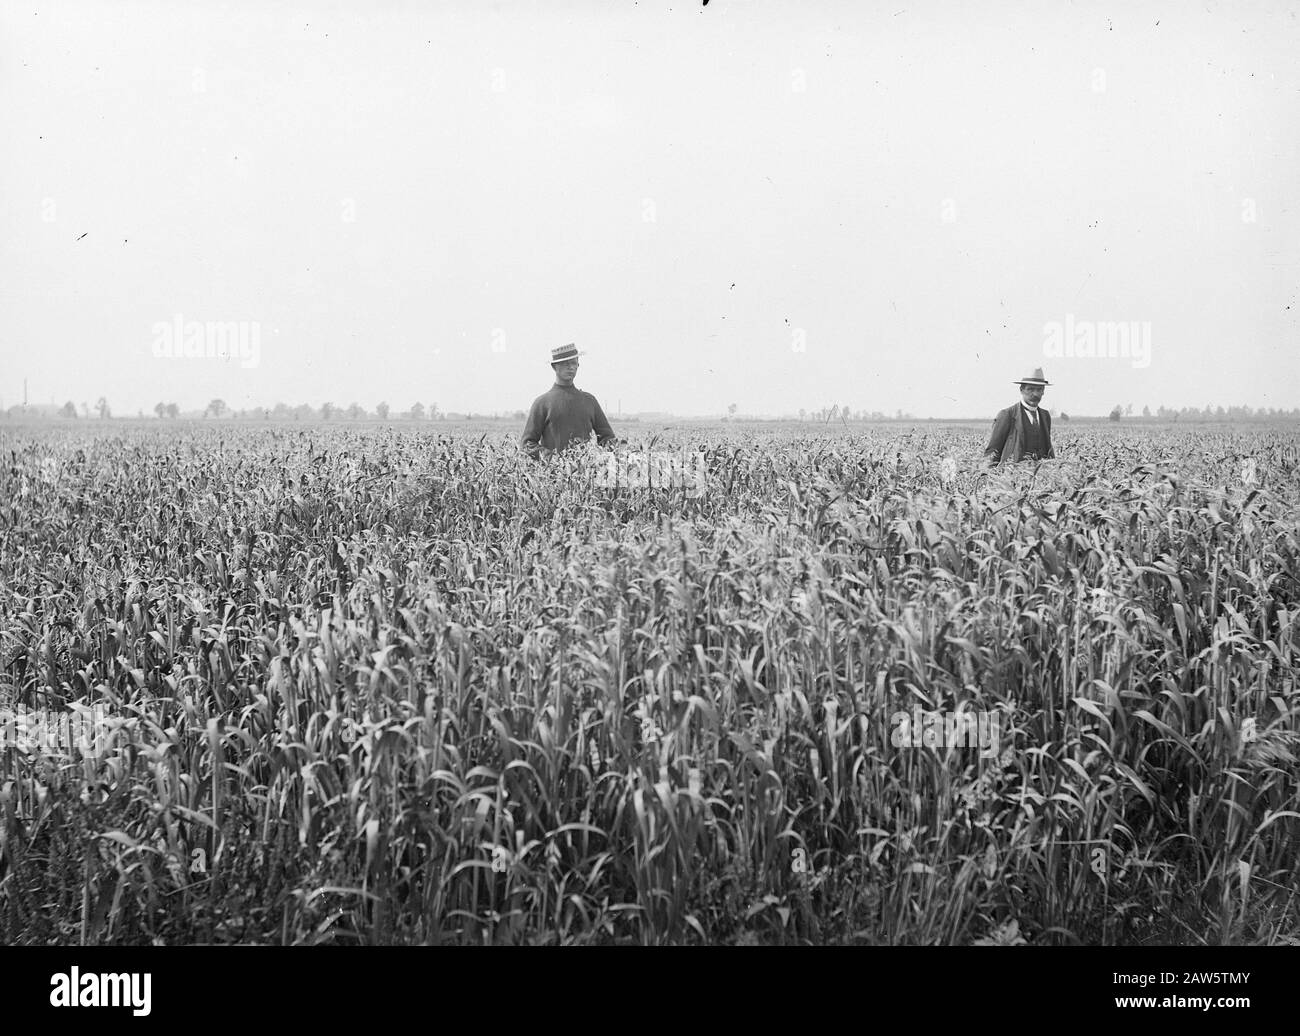 agriculture, oat Date: undated Keywords: agriculture Person Name: oats Stock Photo